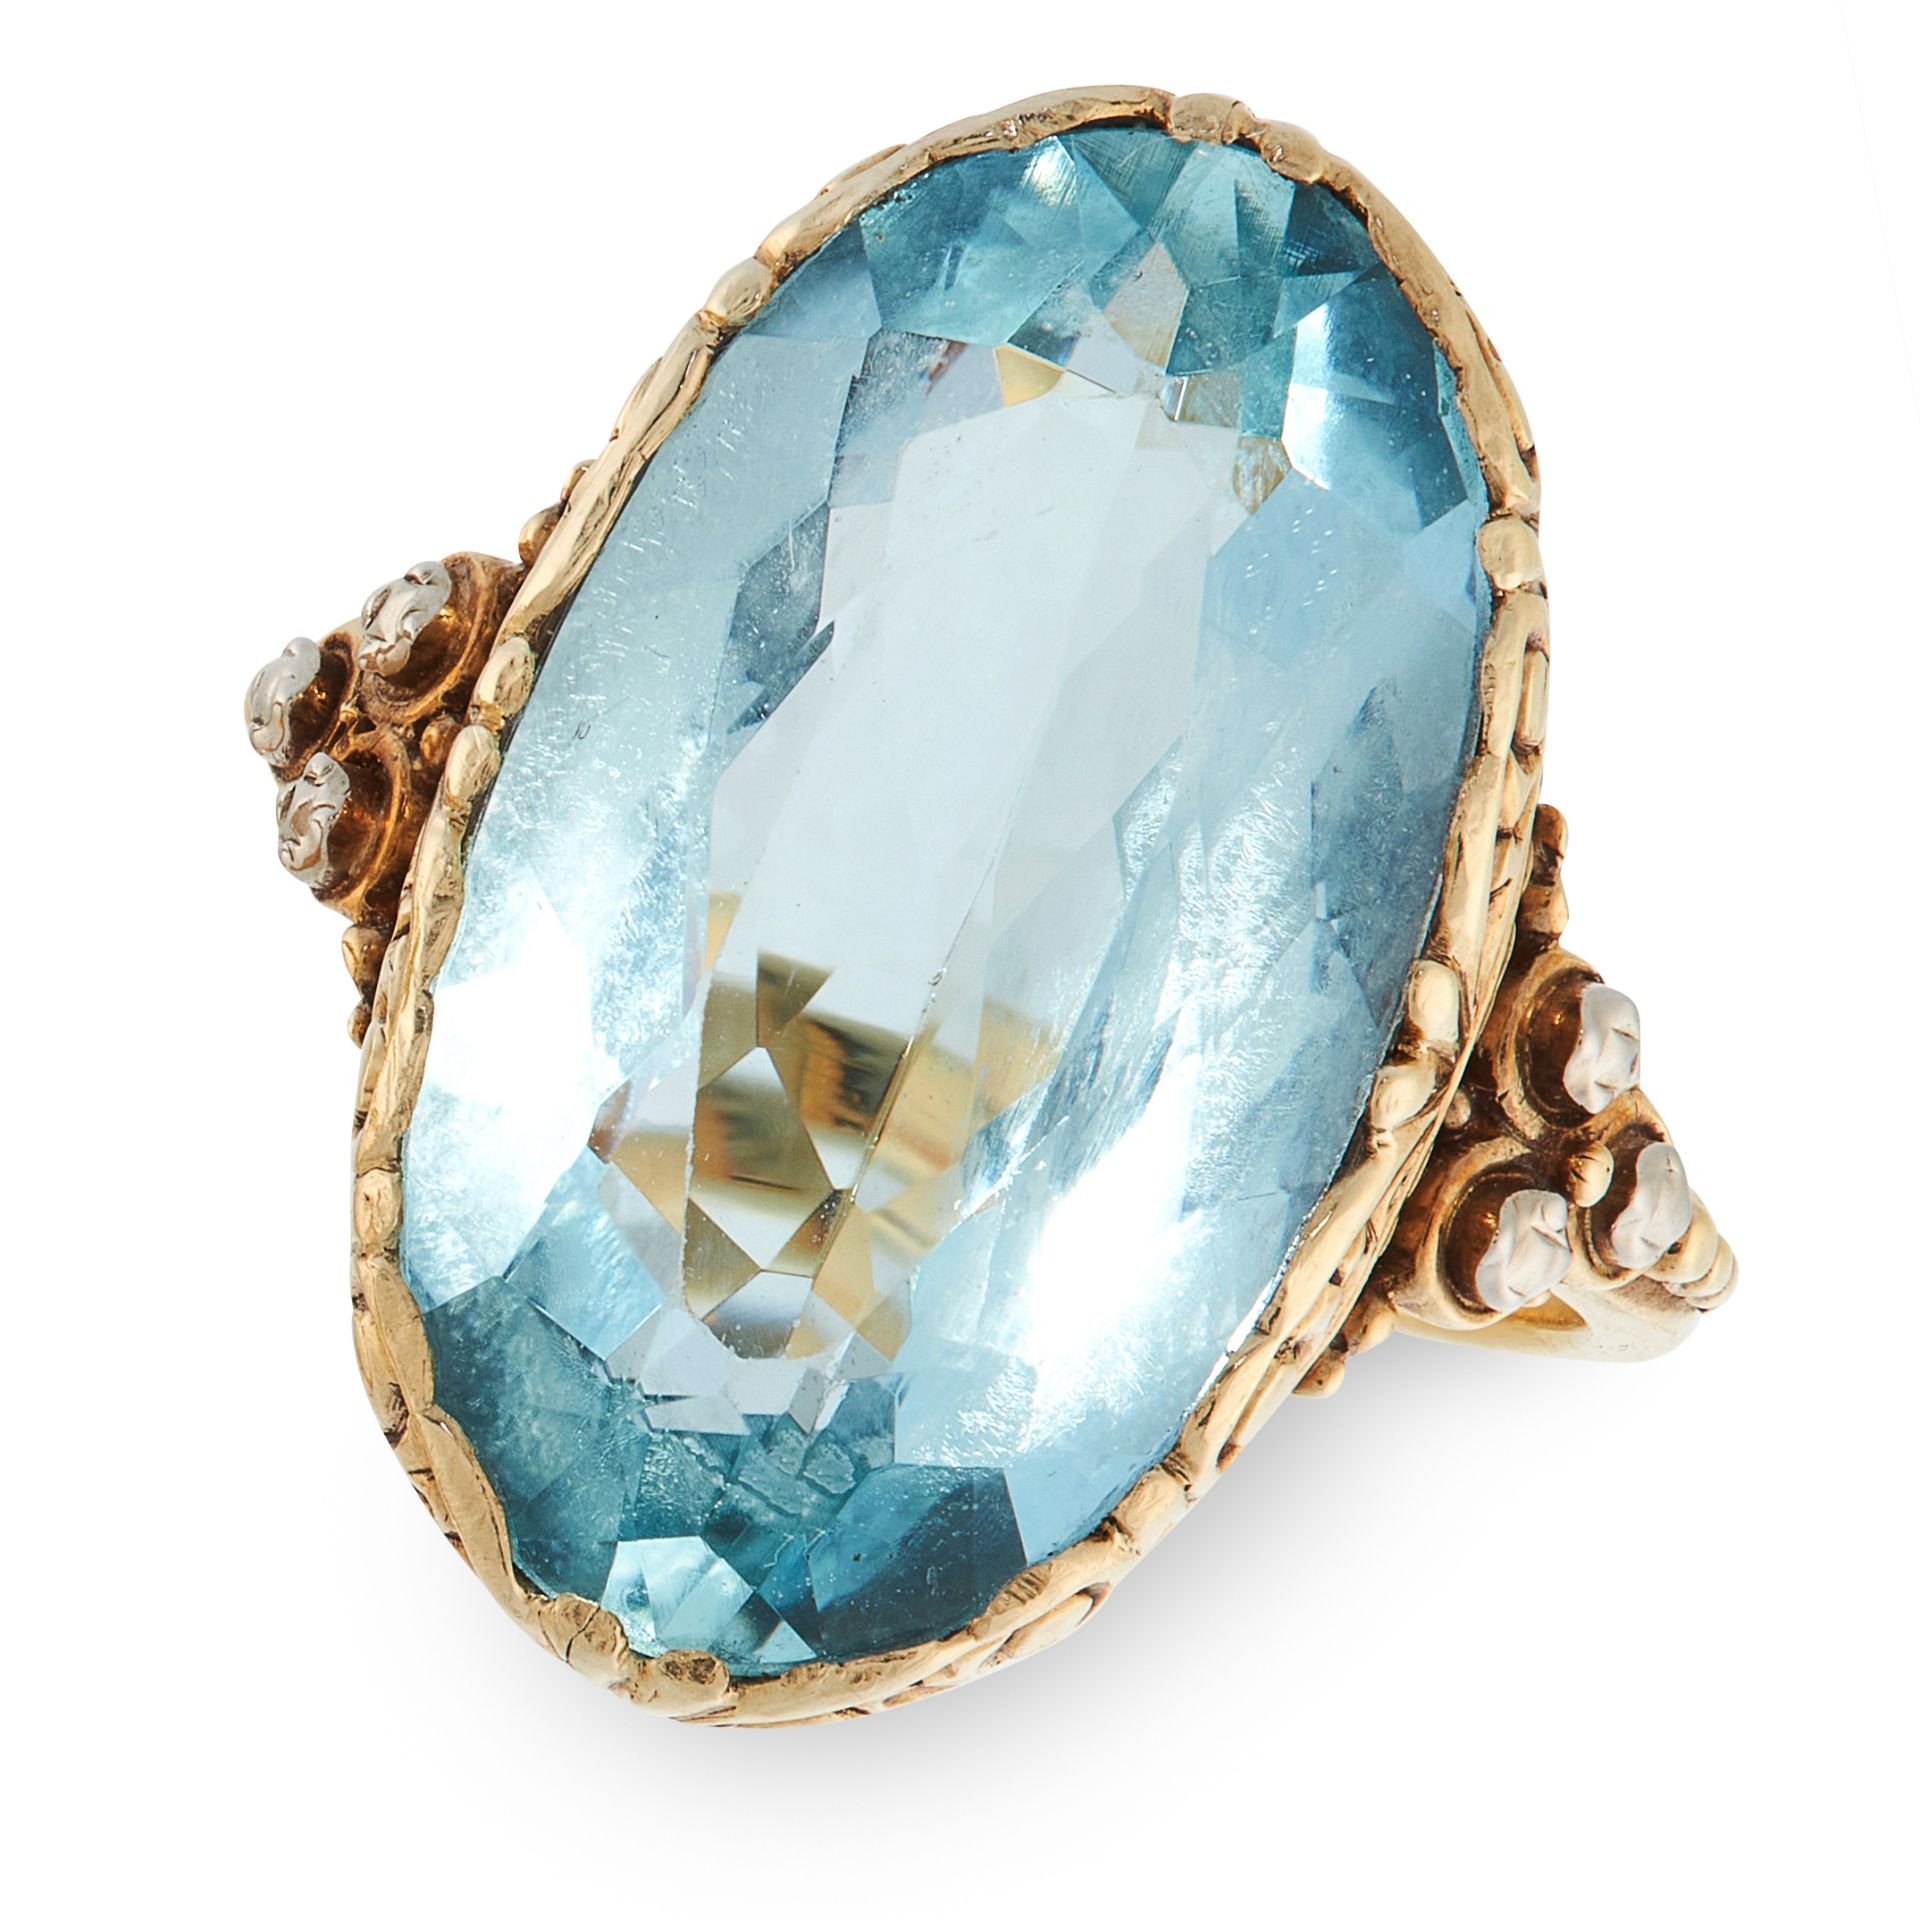 AN AQUAMARINE DRESS RING in yellow gold, set with an oval cut aquamarine of 8.99 carats in a